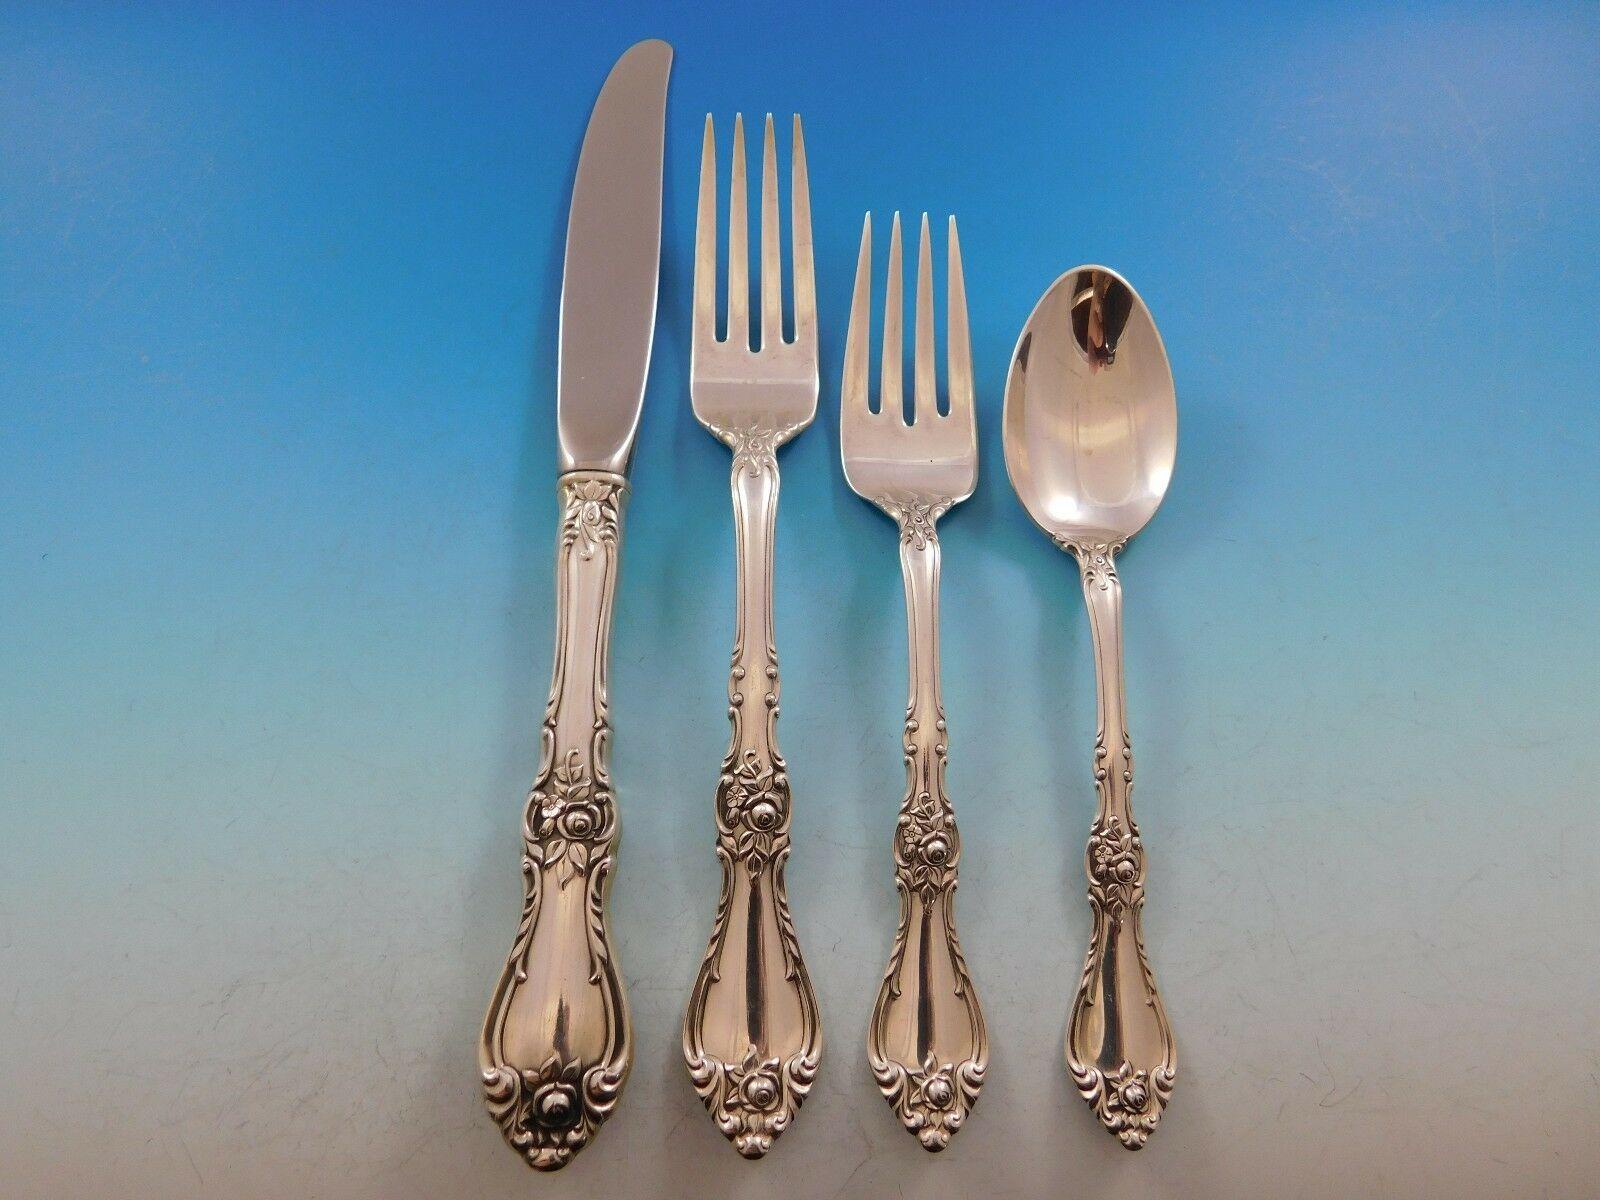 Royal rose by Wallace sterling silver flatware set, 34 pieces. This set includes:

6 knives, 9